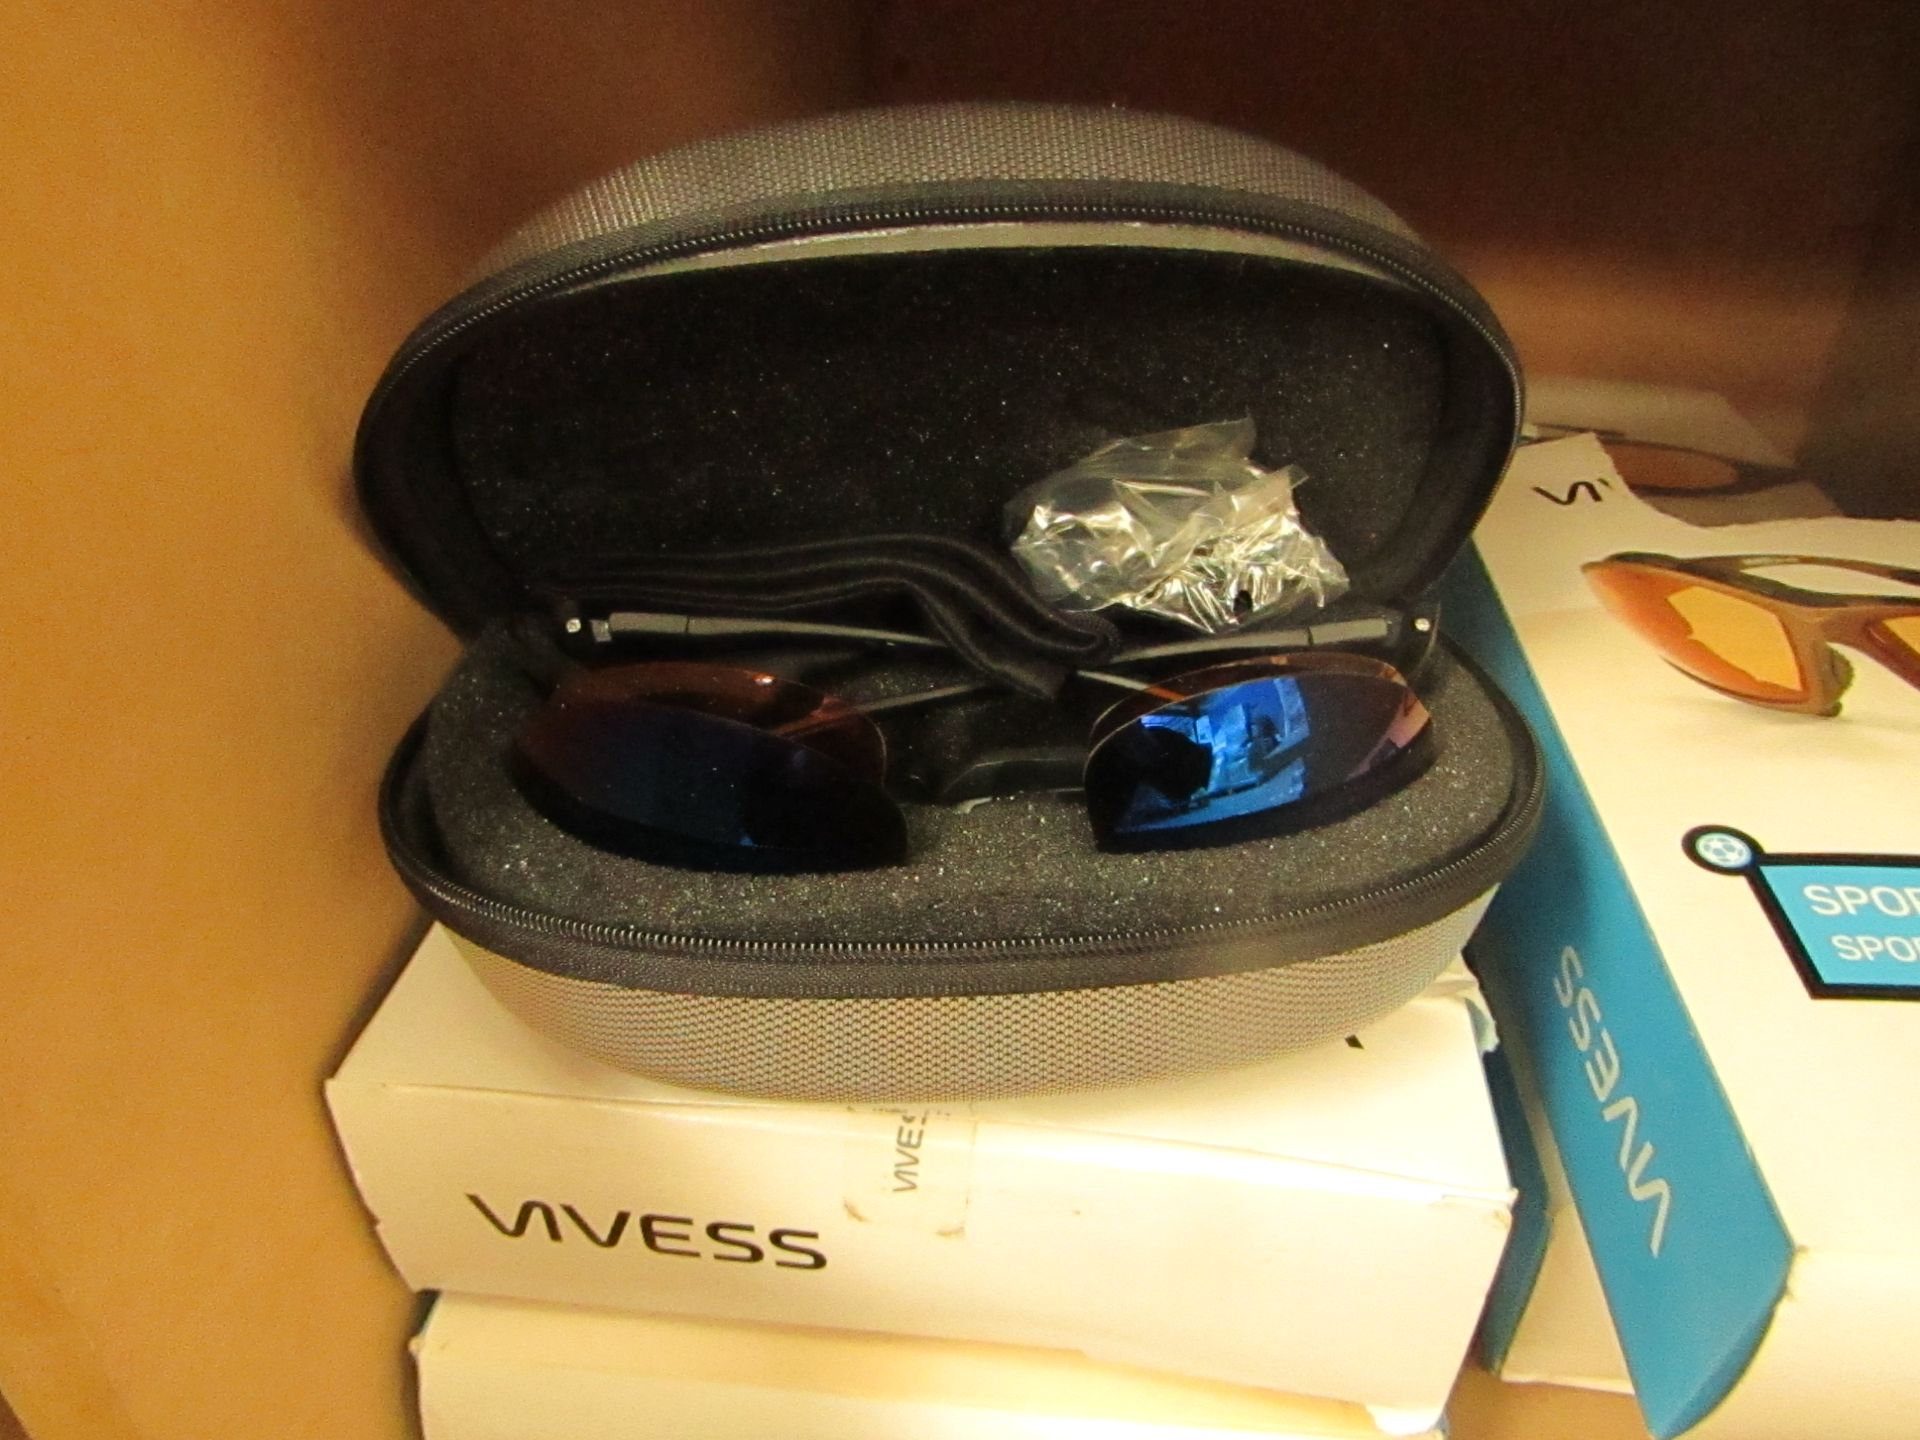 2x Vivess SportBrille Sports Glasses - New & Boxed (but may have damaged packaging)